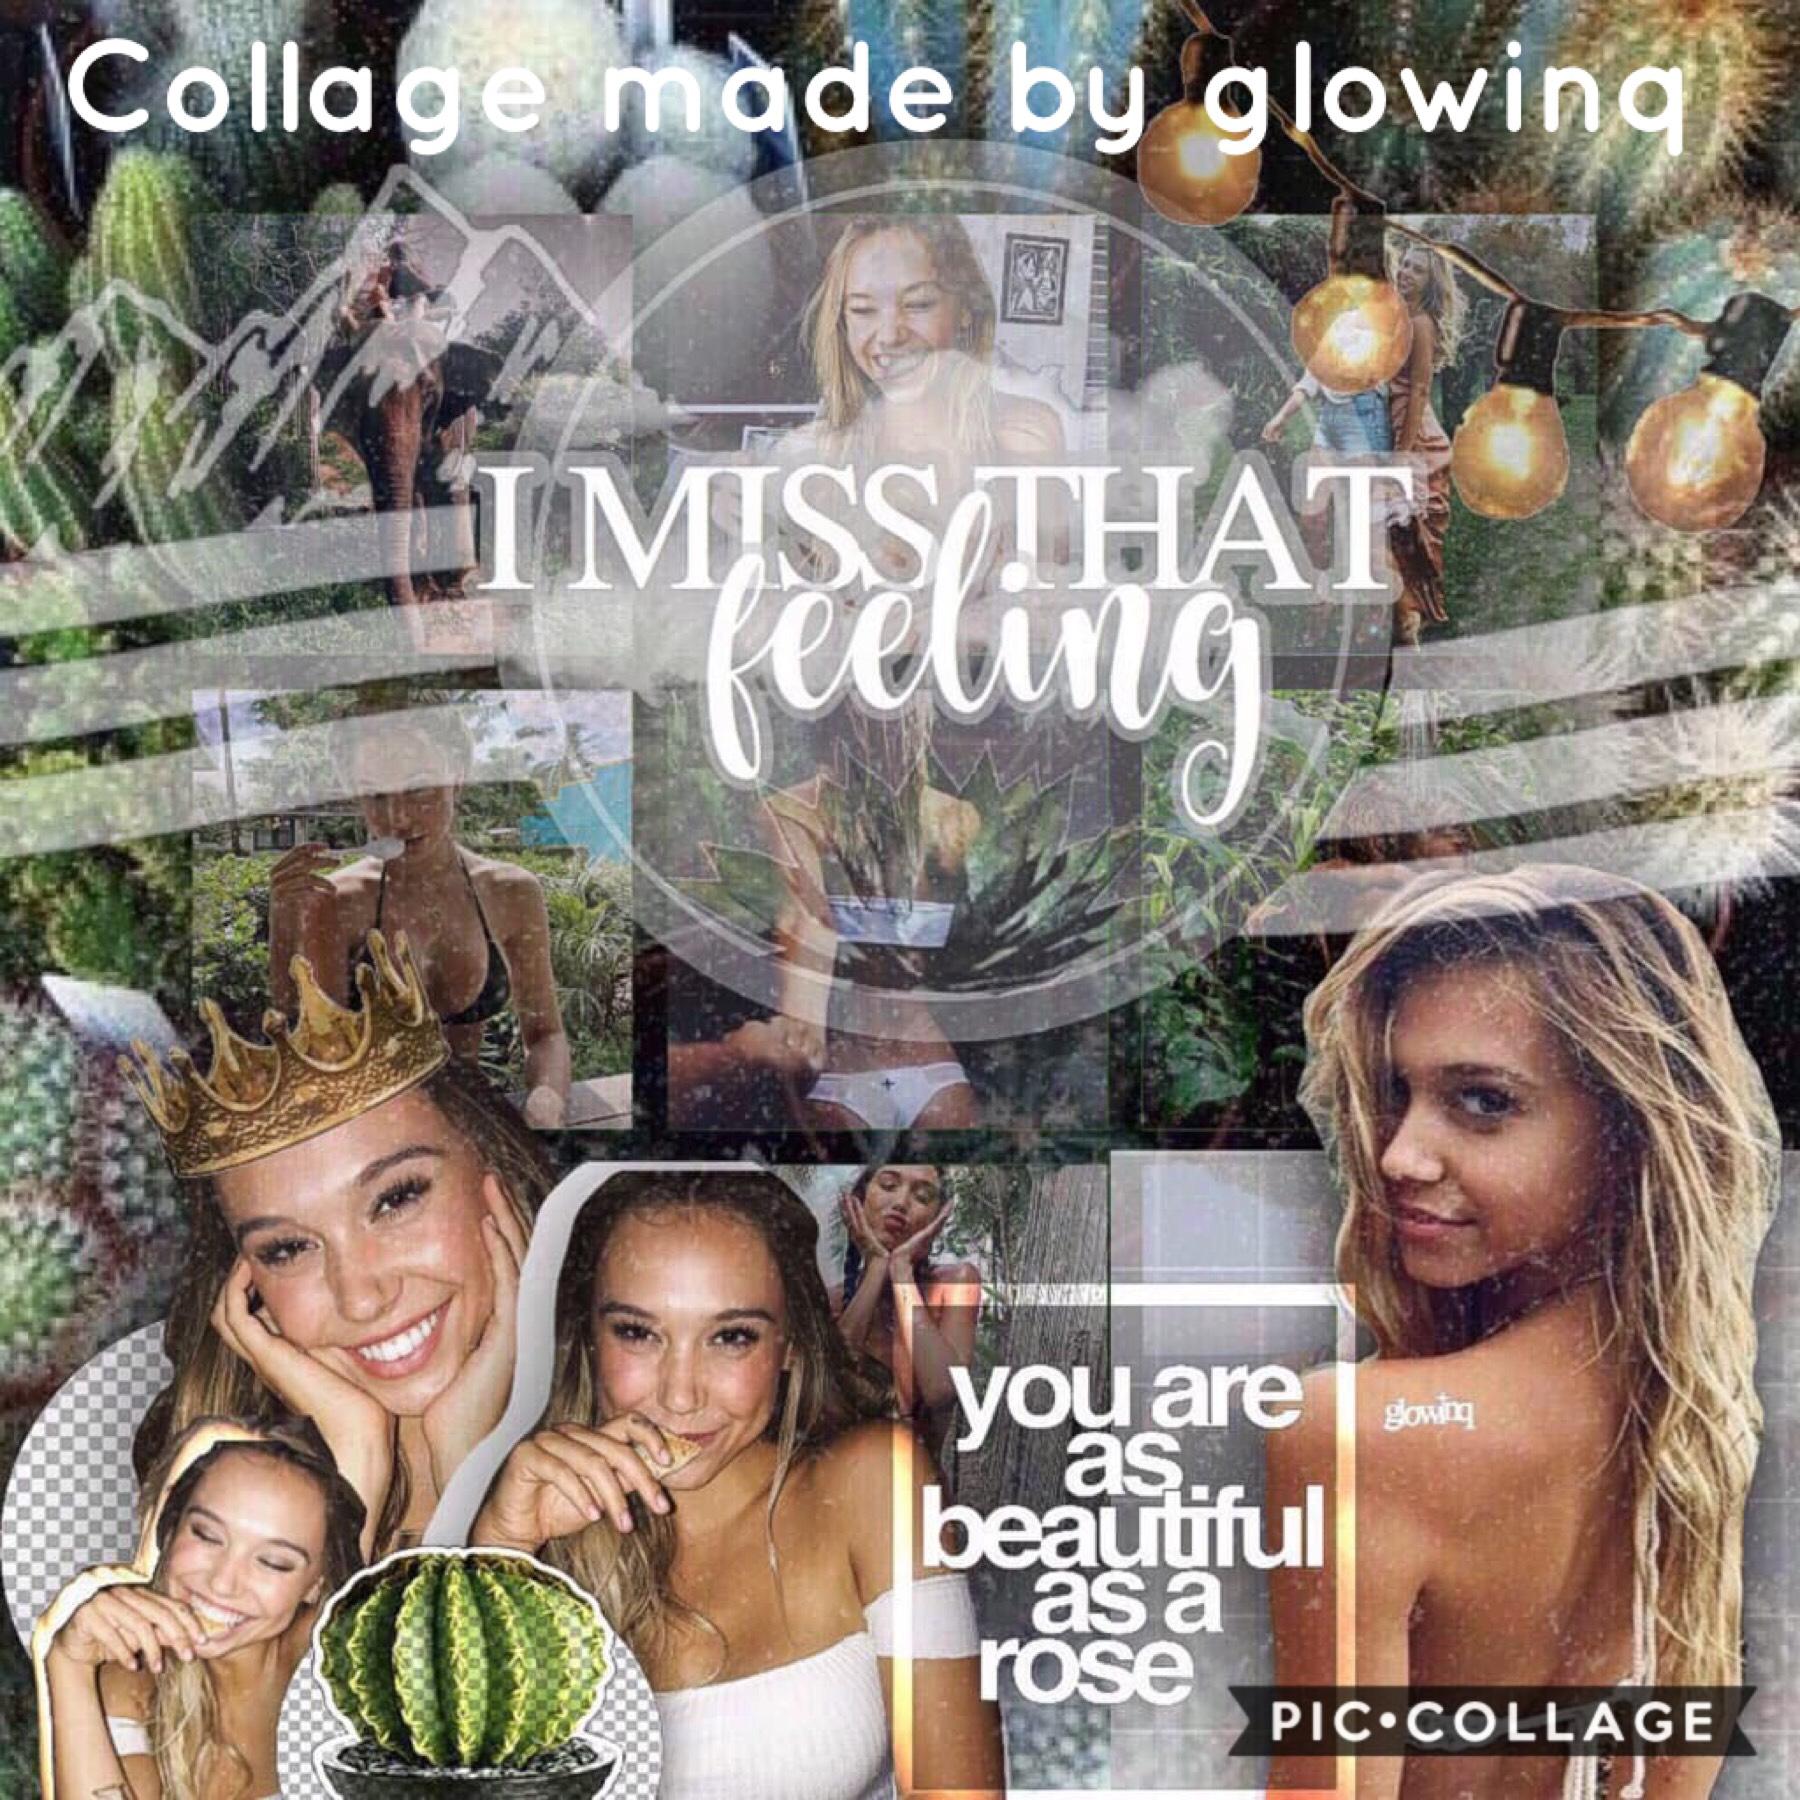 🌵⛰Tap🌵⛰...
This collage was made by glowinq!  She is so good at combining things together to make beautiful collages!  She only has 50 followers, so please go follow her!